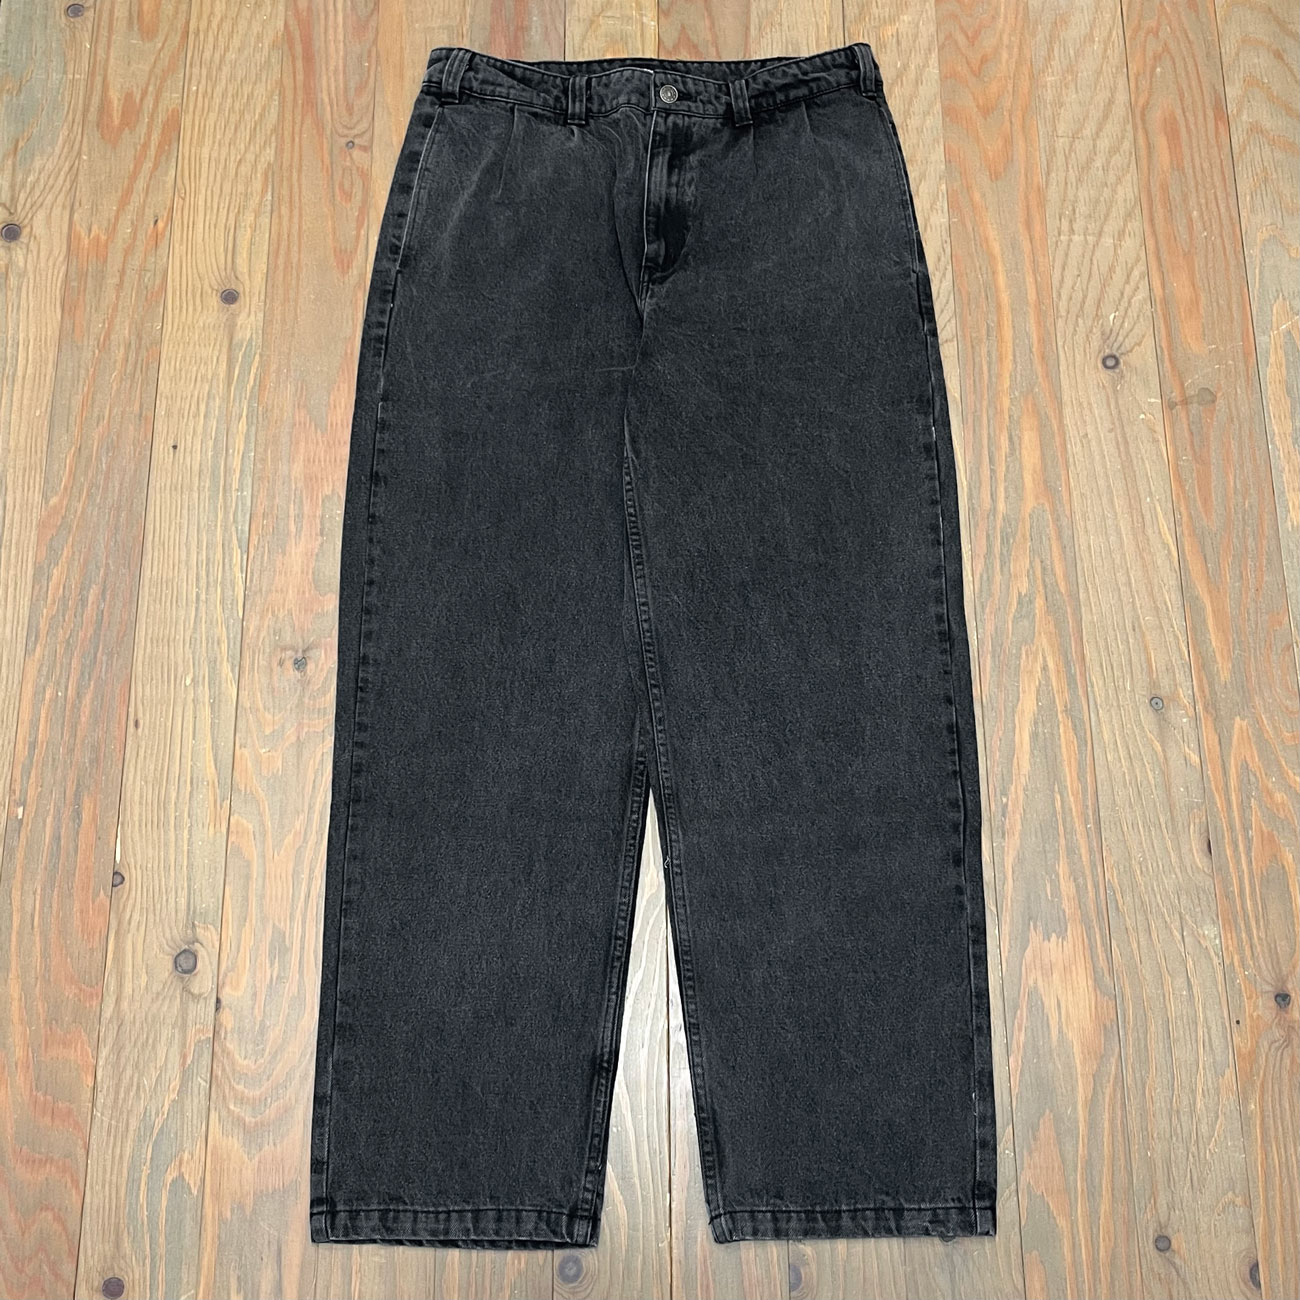 THEORIES BELVEDERE PLEATED DENIM TROUSERS